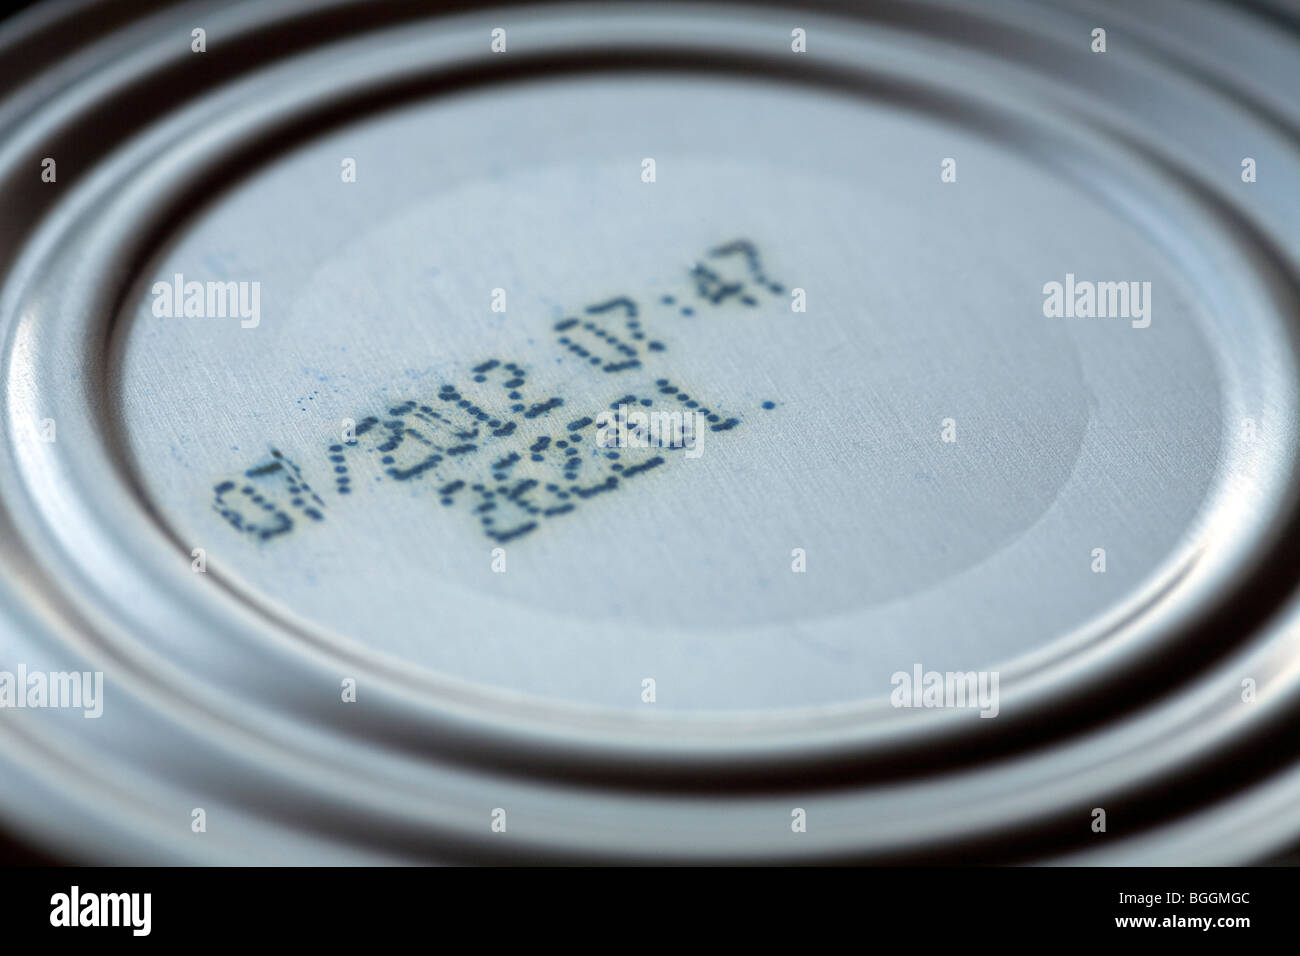 Detail of the base of a food tin showing the manufacturers sell by date, product/ batch code and the pressed metal ring pattern Stock Photo